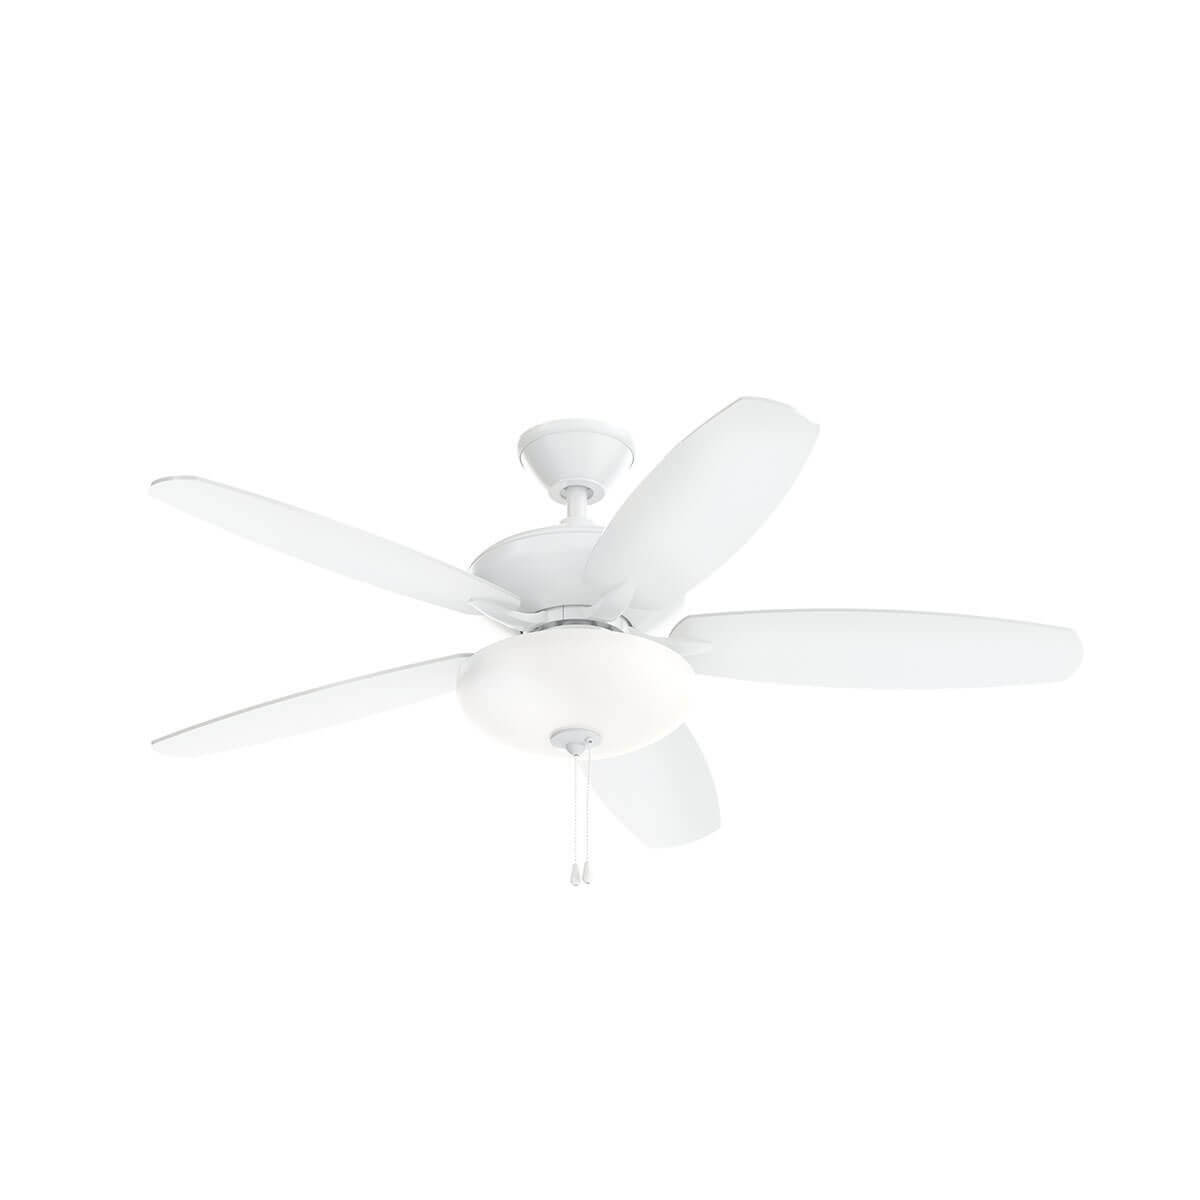 Kichler Renew 52 inch 5 Blade Pull Chain LED Ceiling Fan in Matte White 330161MWH